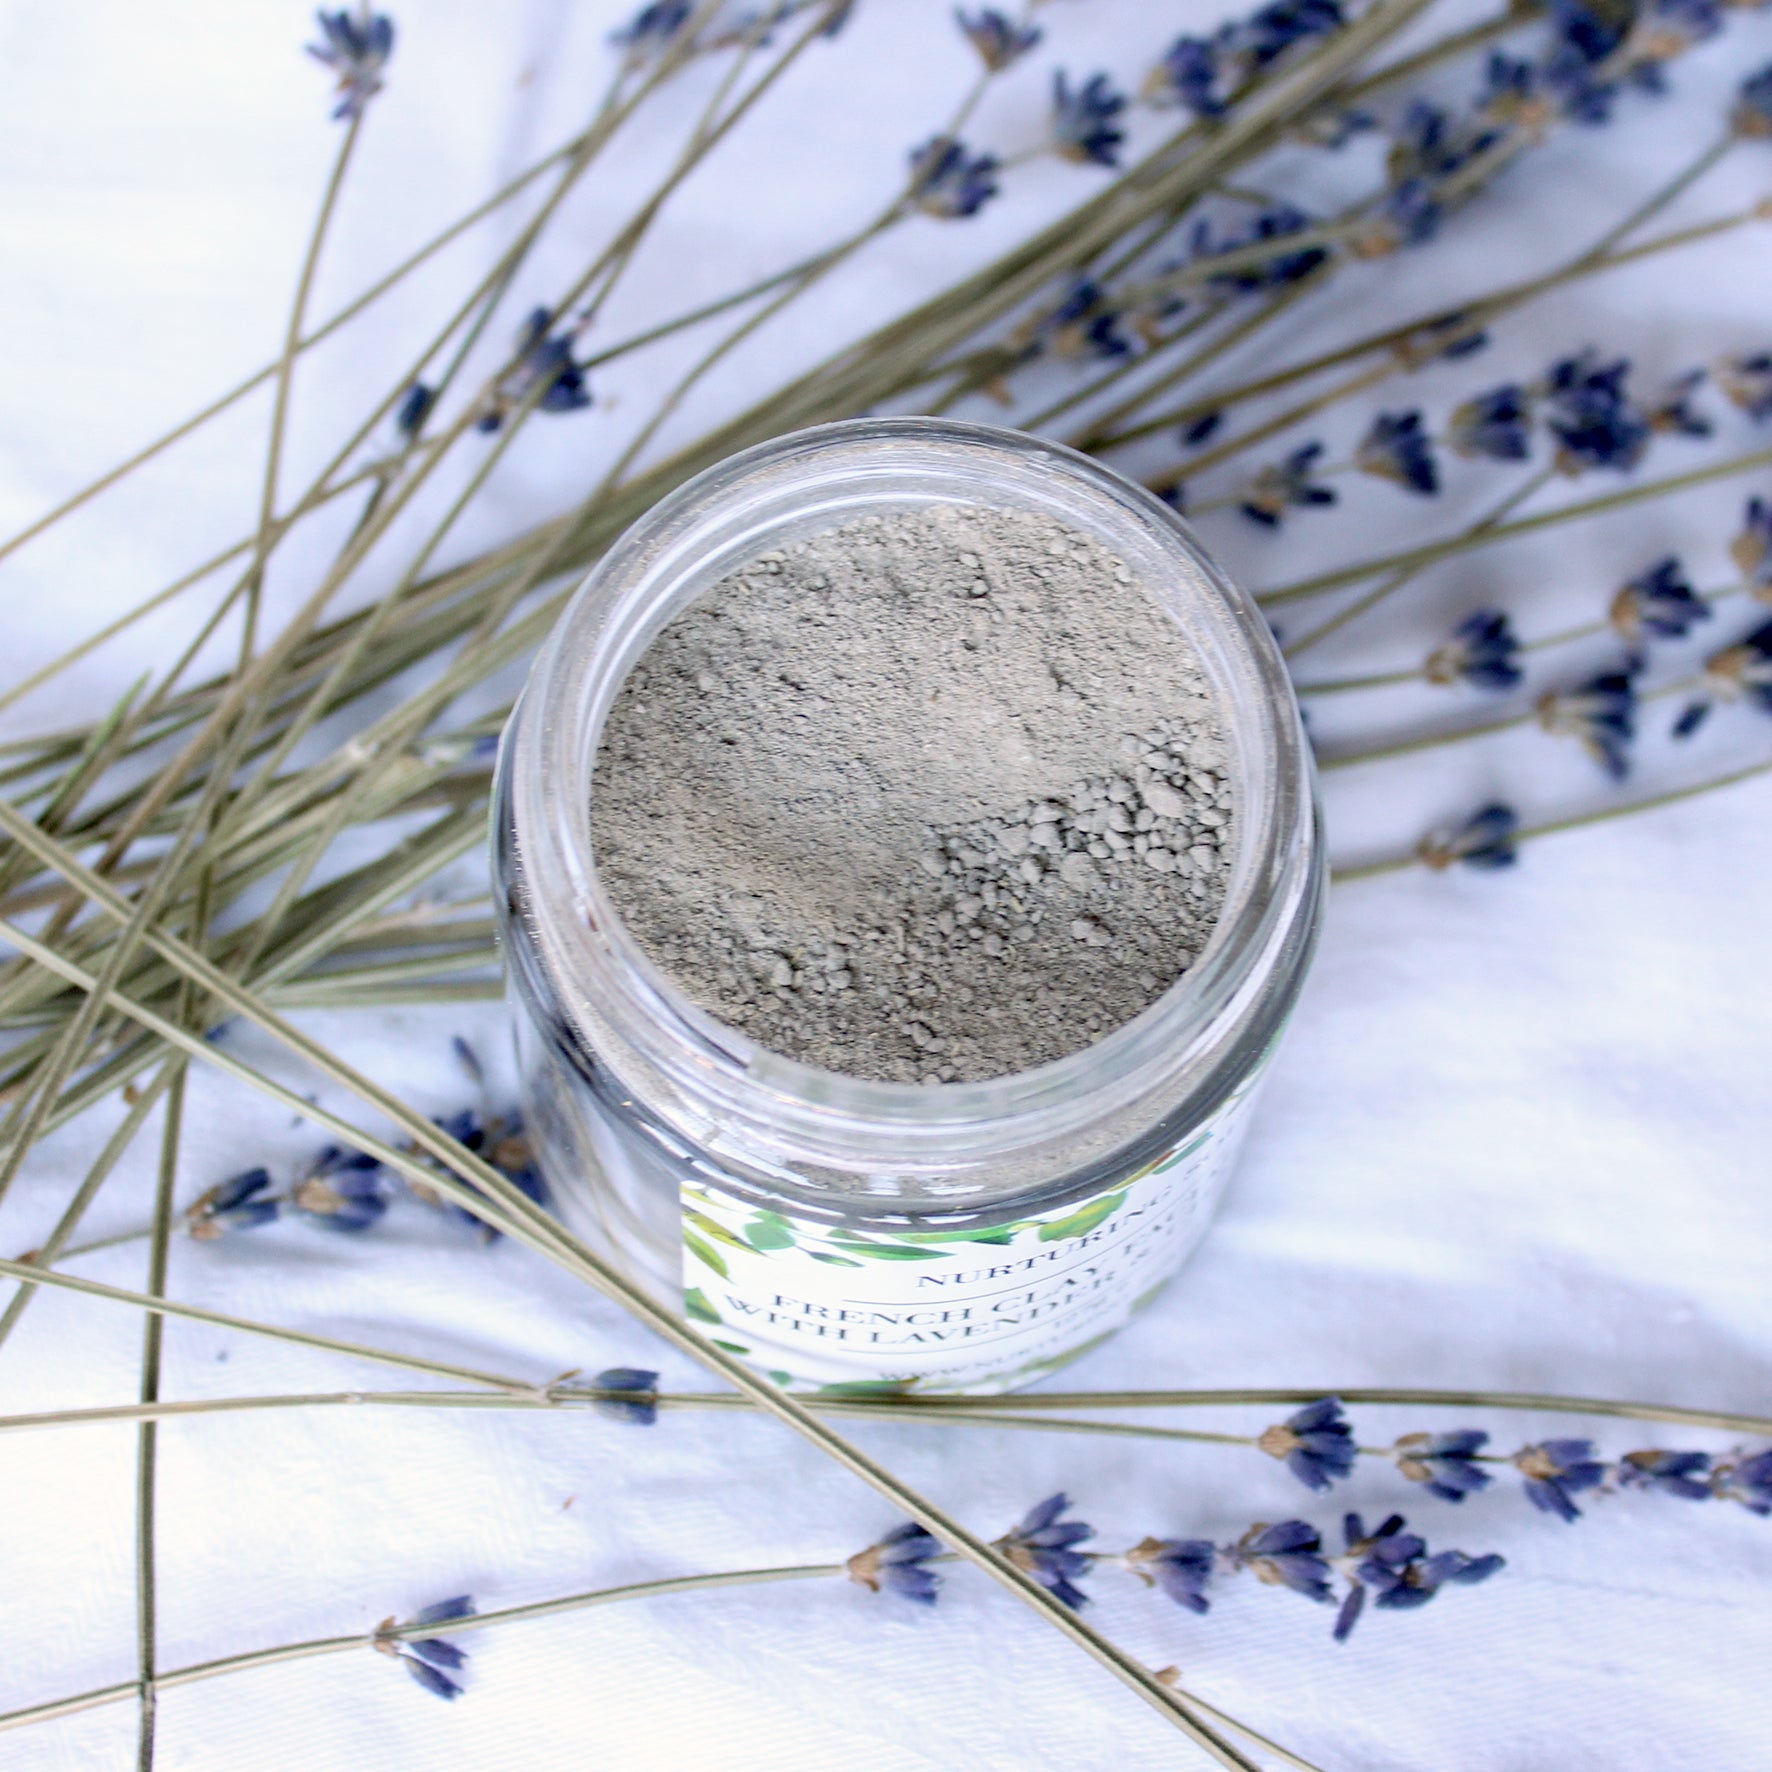 French Clay Facial Mask With Lavender & Chamomile